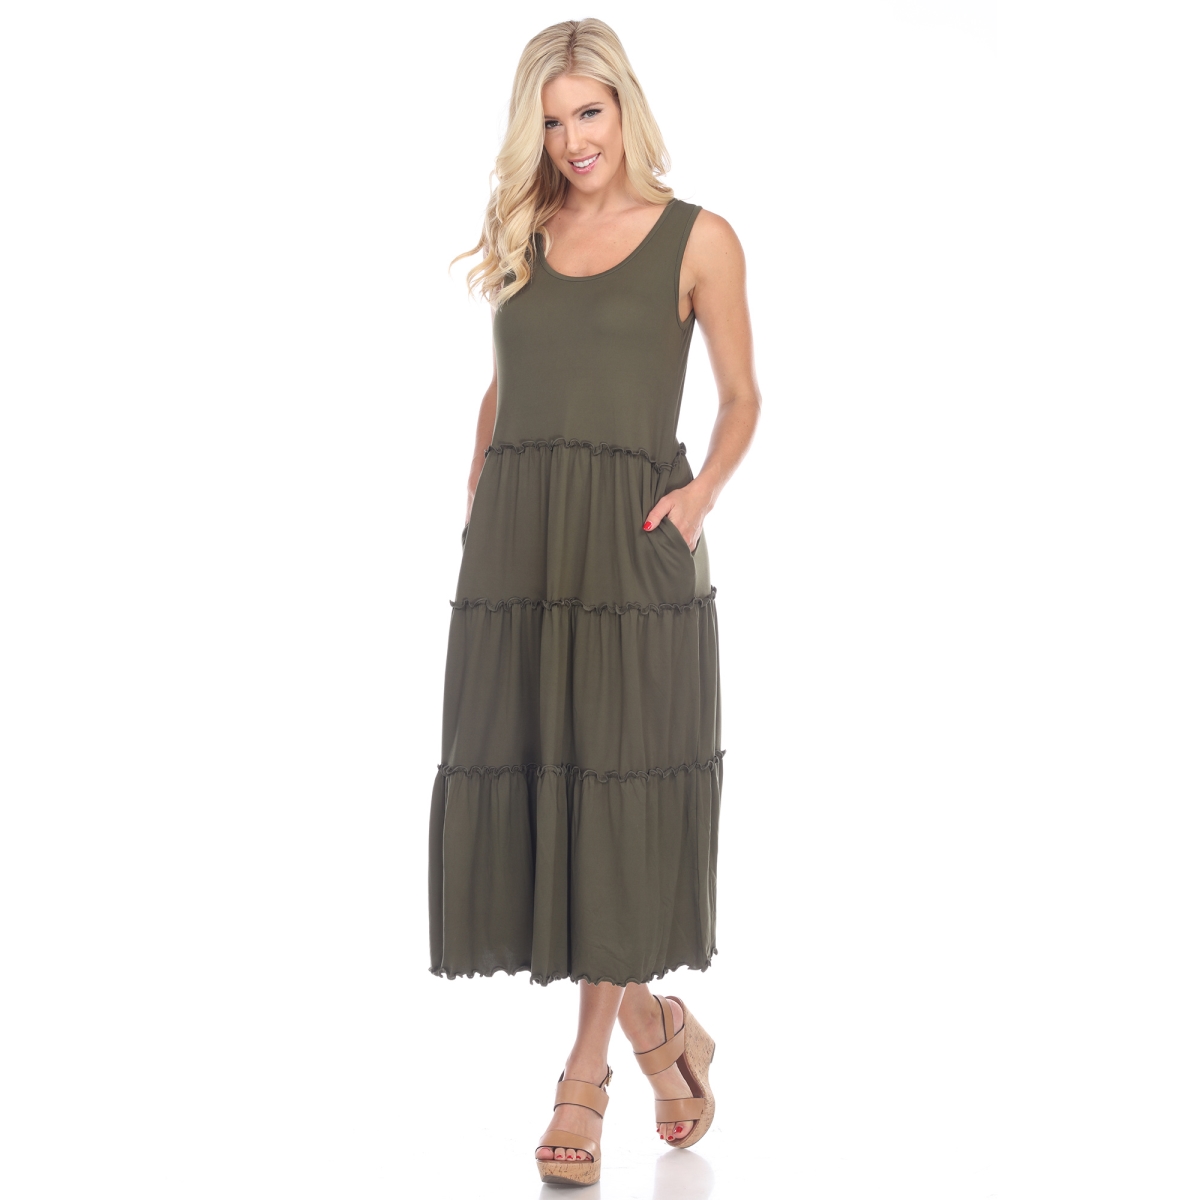 Picture of White Mark 315-02-S Olive Scoop Neck Teired Midi Dress - Small